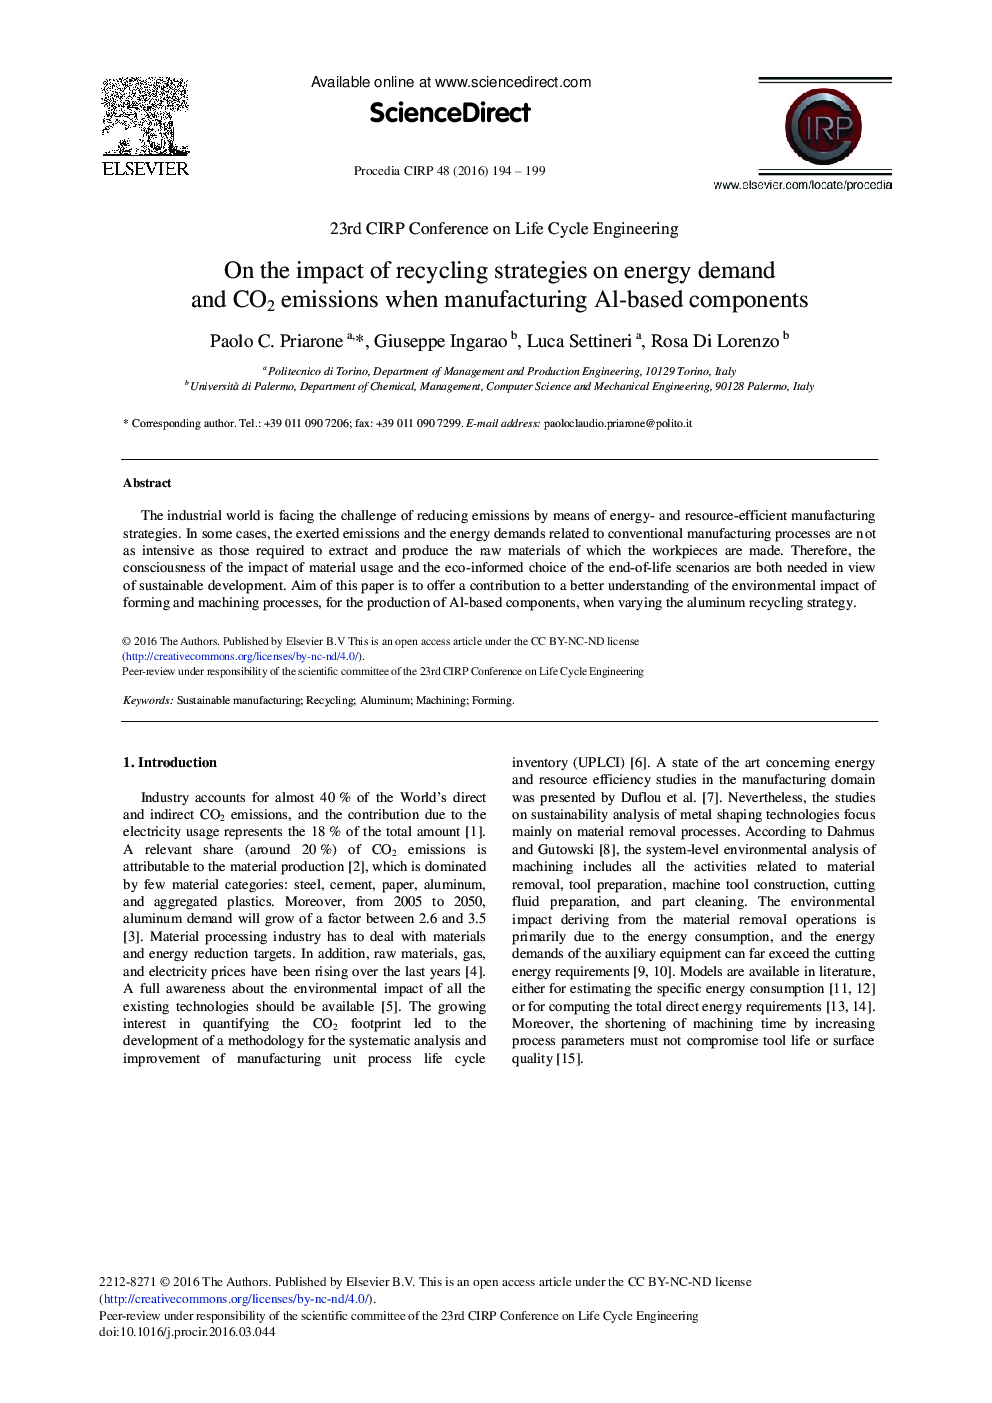 On the Impact of Recycling Strategies on Energy Demand and CO2 Emissions When Manufacturing Al-based Components 